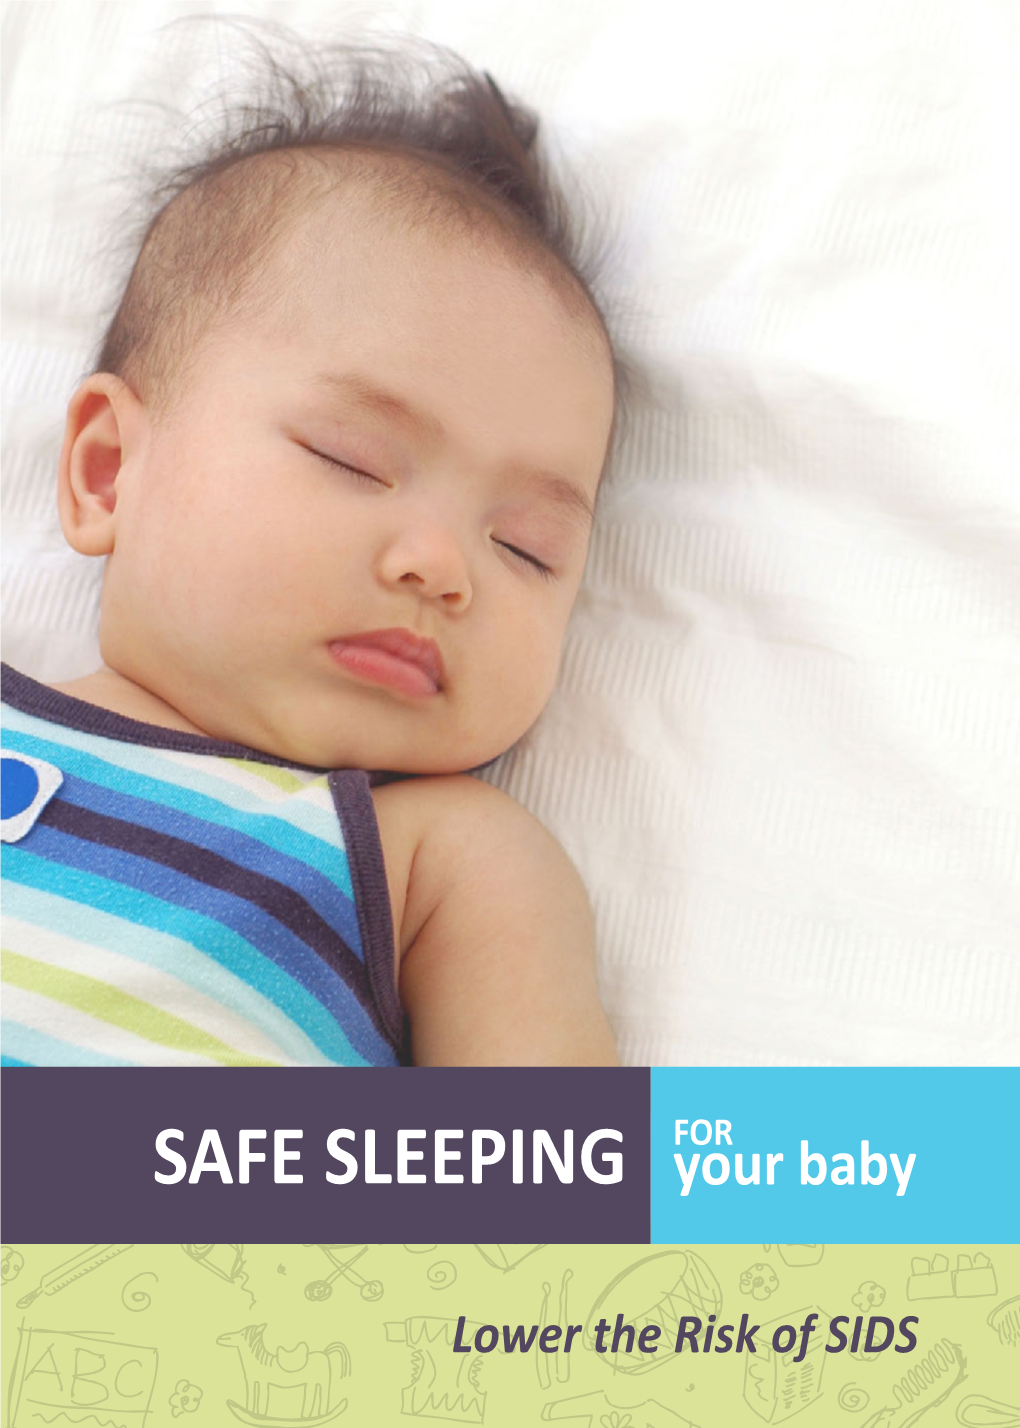 SAFE SLEEPING Your Baby